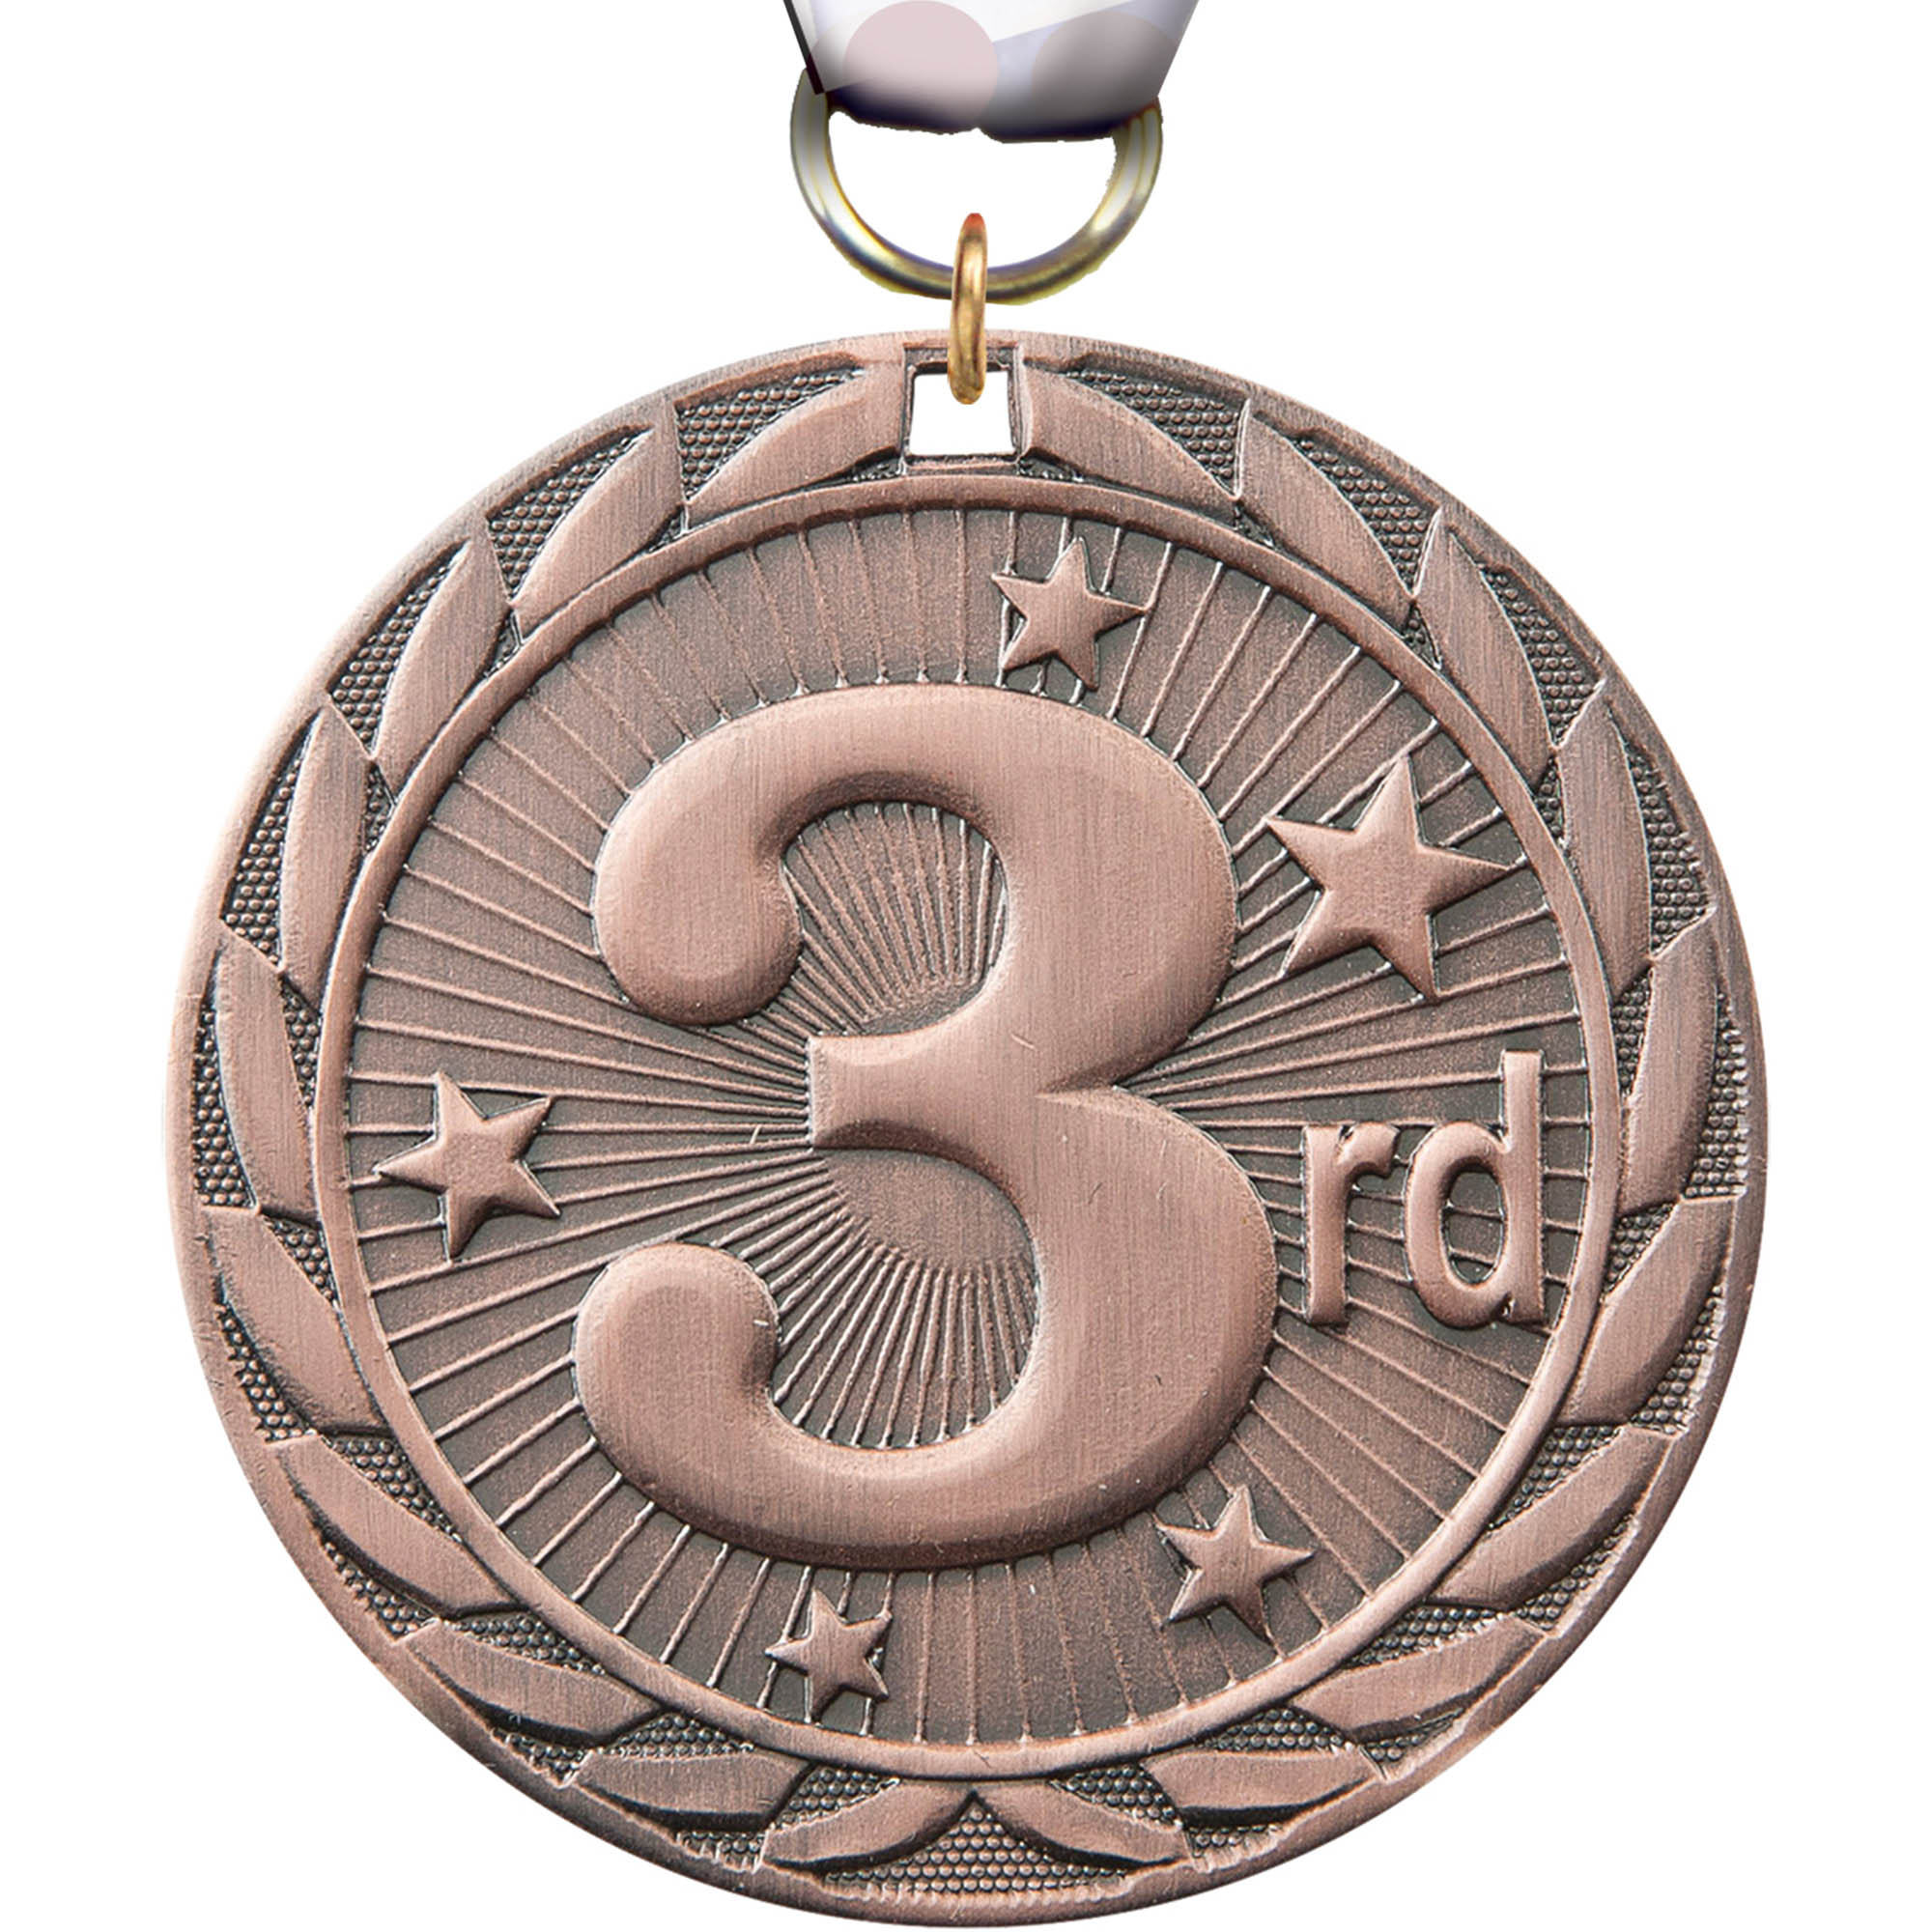 3rd Place FE Iron Medal